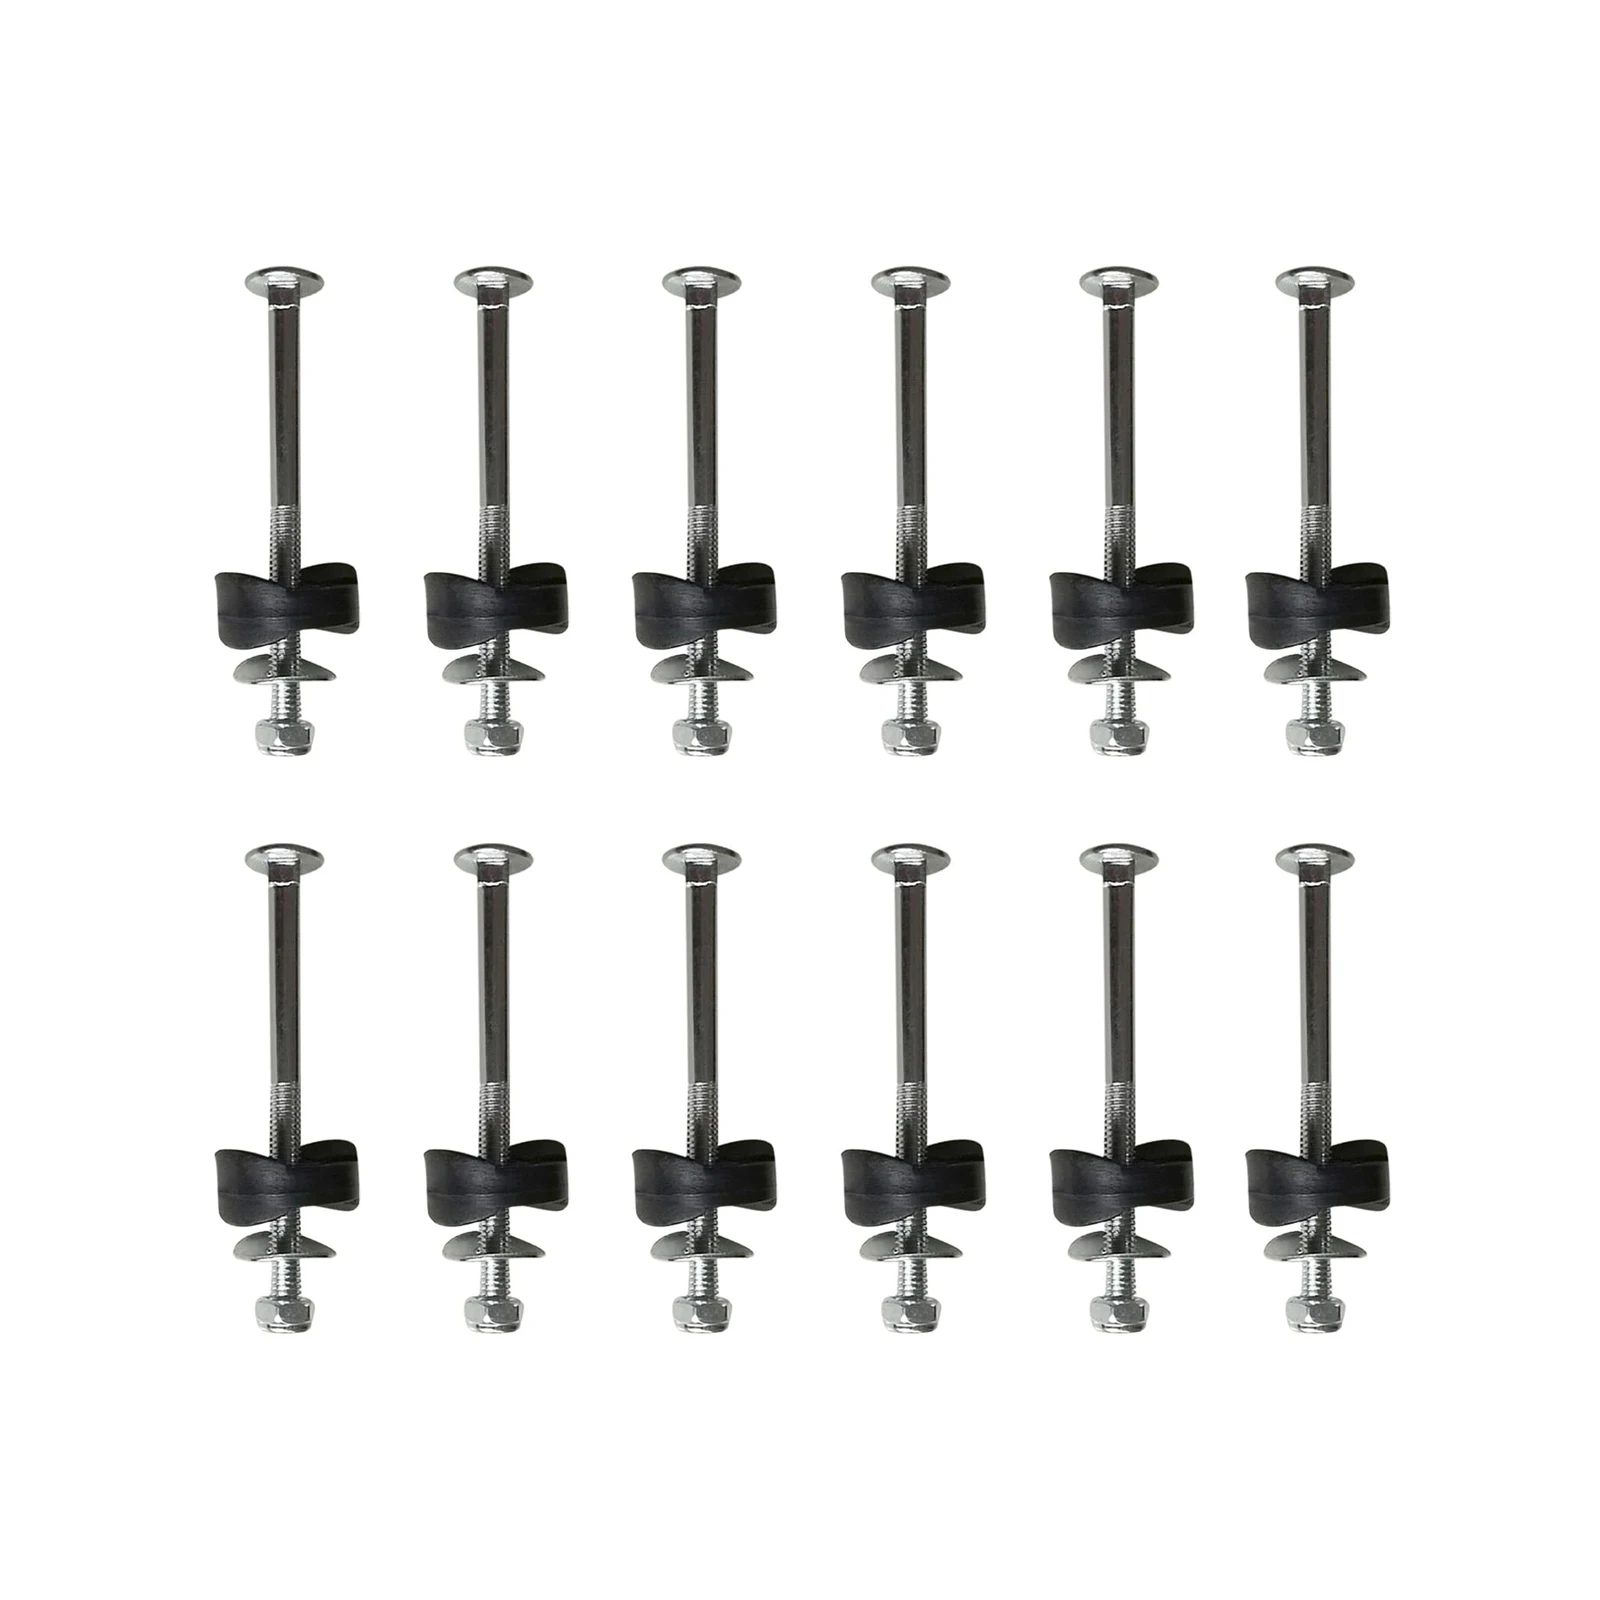 

12pcs Trampoline Screws Set For Attaching The Trampoline High Quality Strong Trampoline Fixing Screws Kit Stability Tool Set